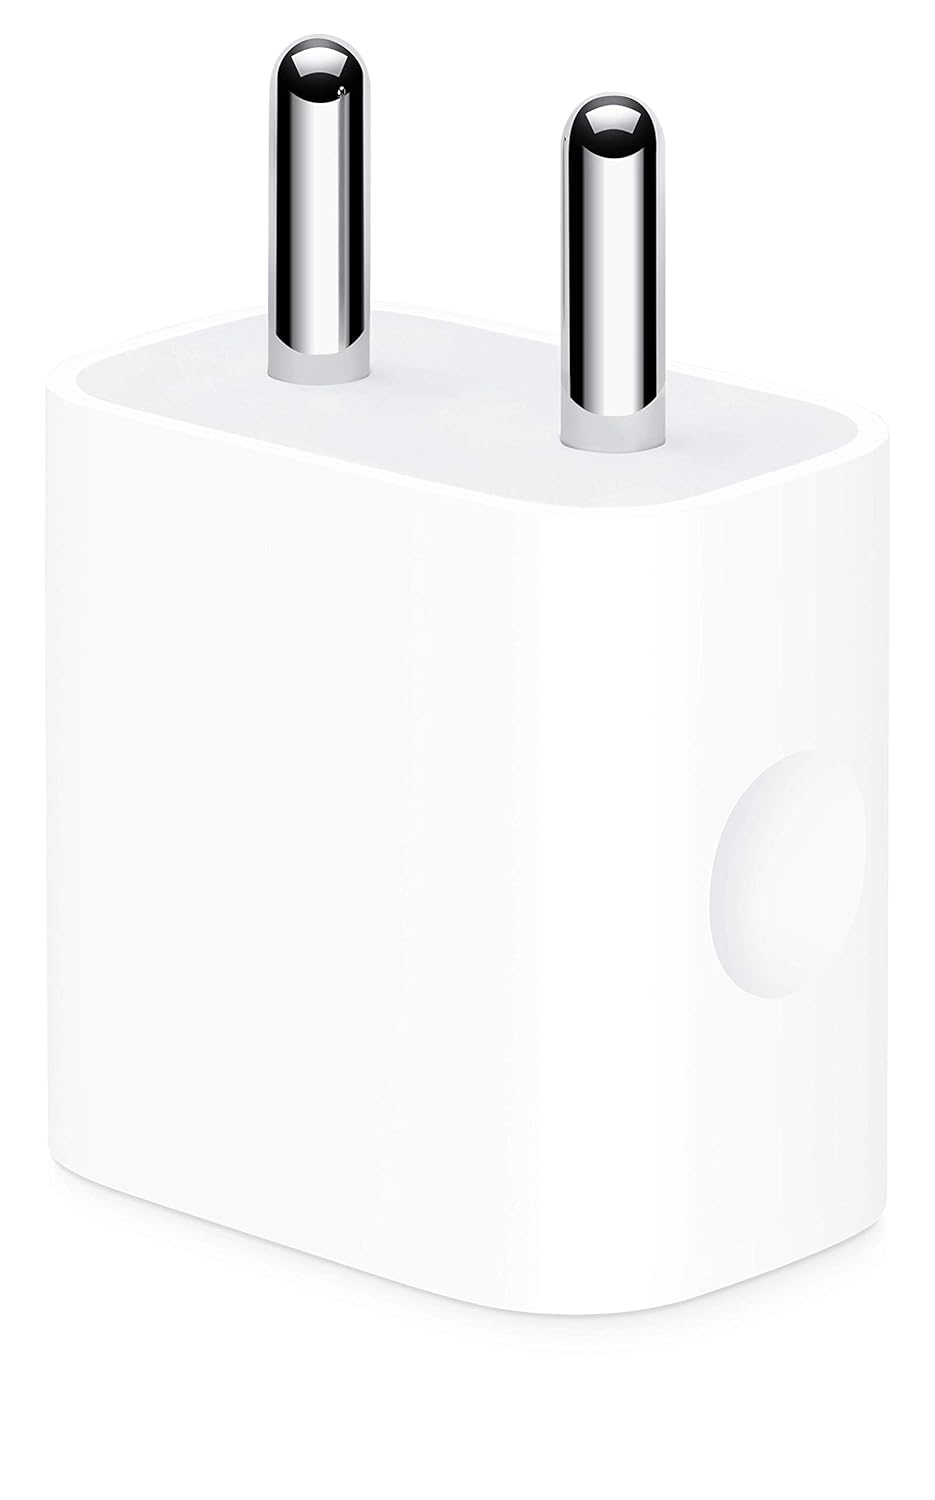 Apple 20W USB-PD Adapter for iPhones, Samsung, Google and Sony Smartphones.